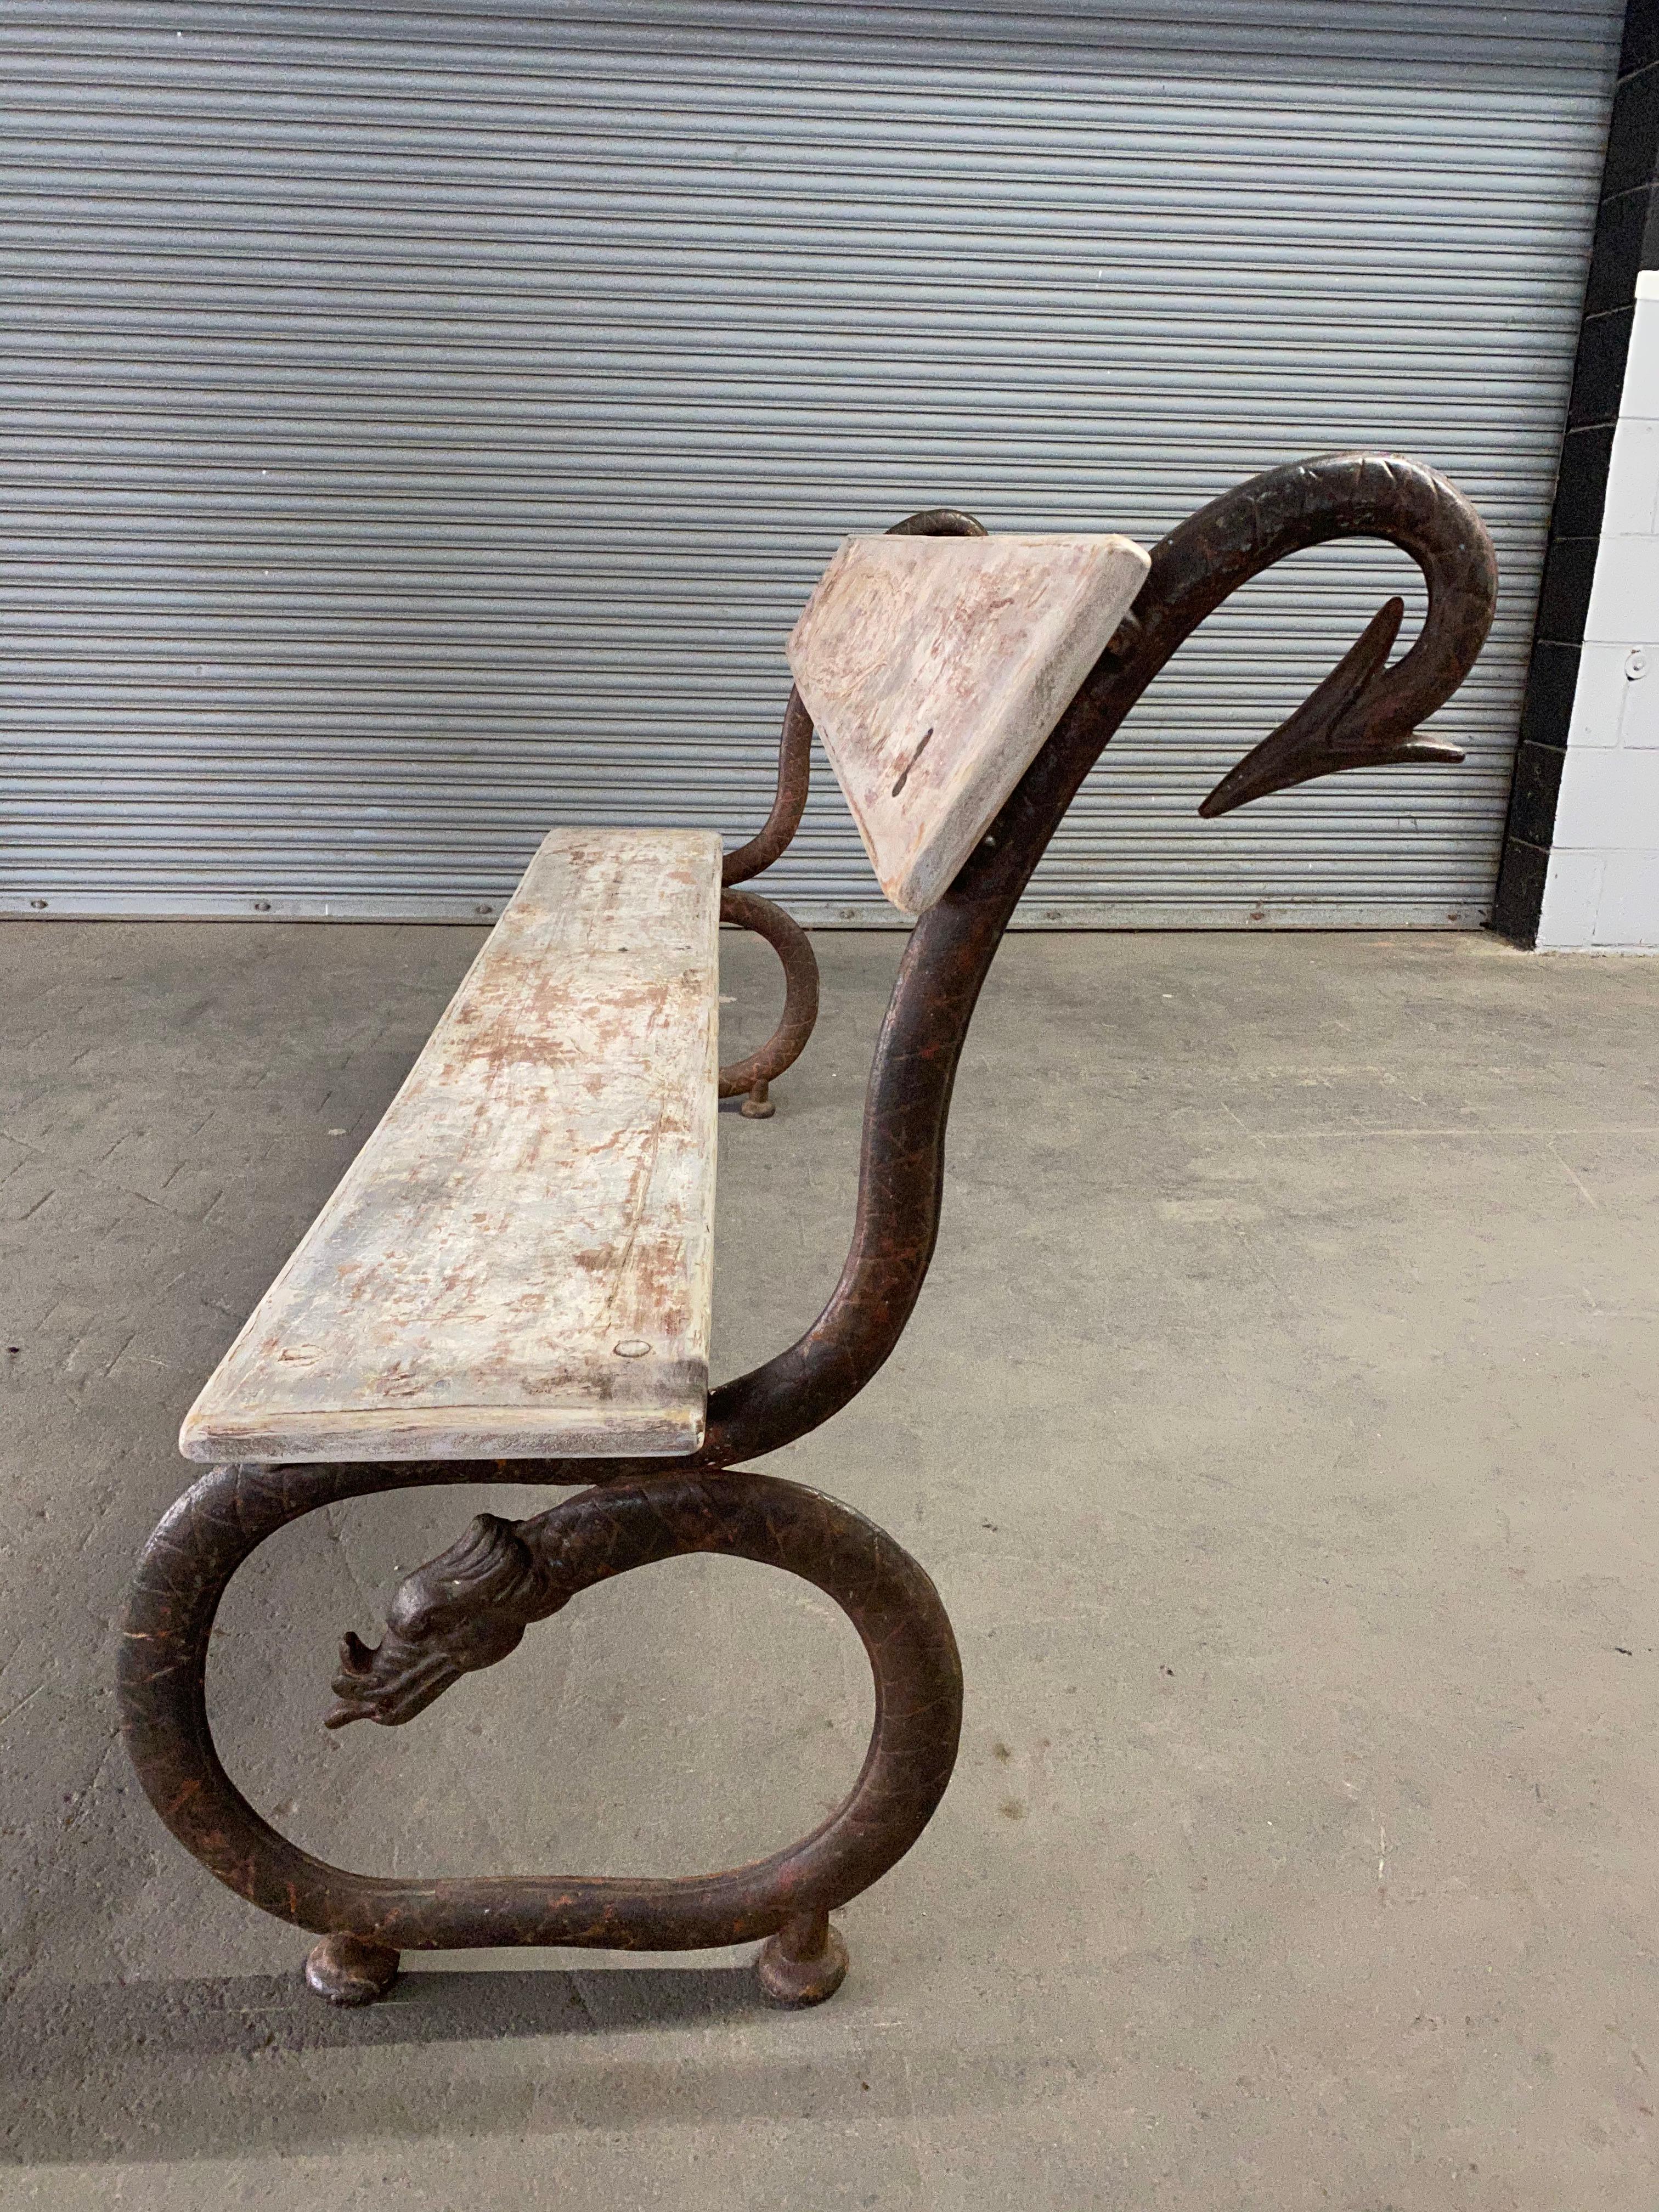 A sculptural English (or French) garden bench with the supporting cast iron base in the shape of stylized dragons or serpents, open to interpretation. The new wood planks that form the seat and back are new and have been finished in an antique